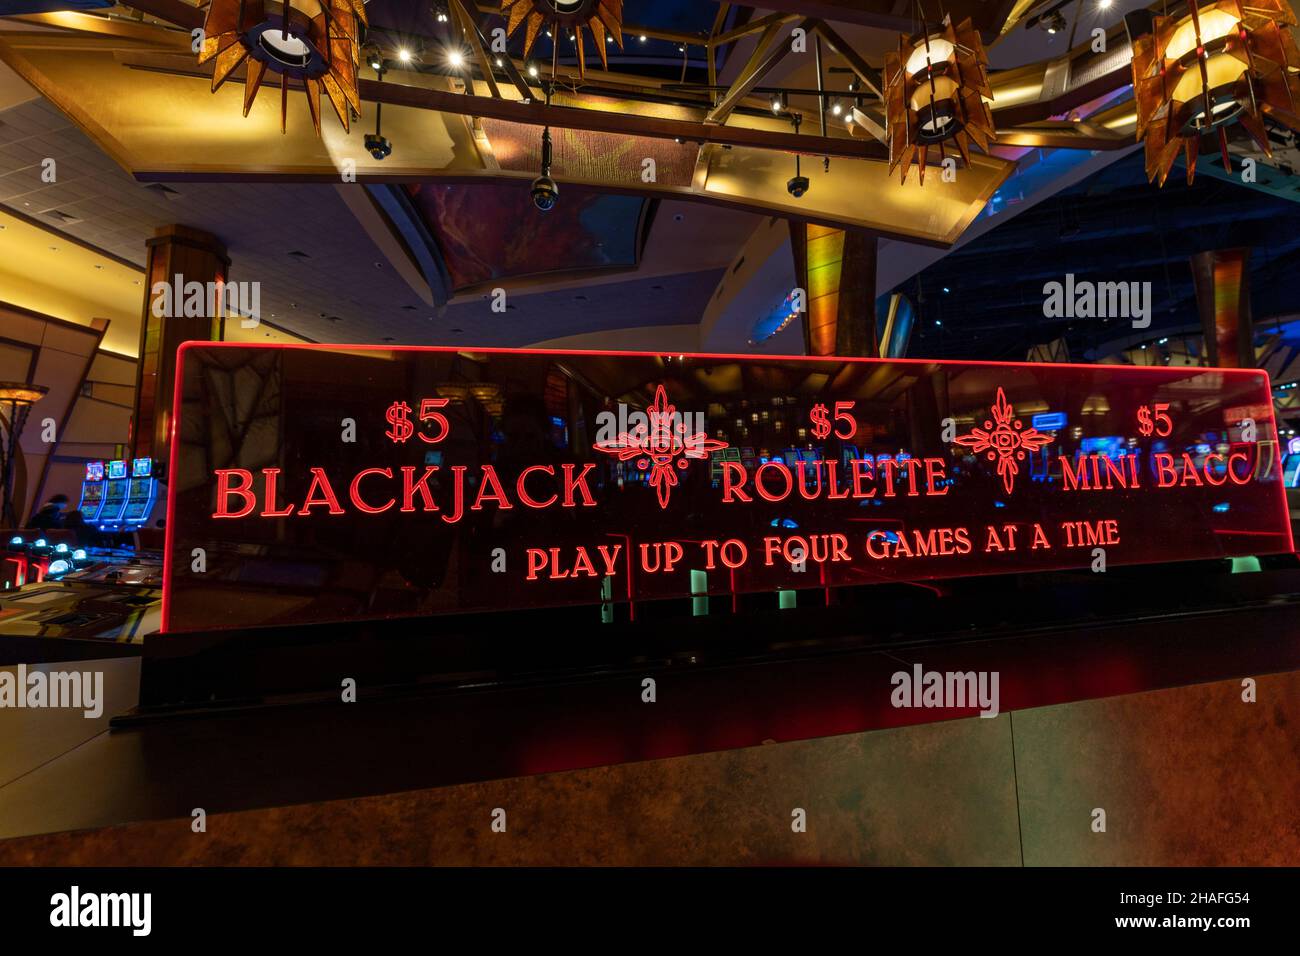 Sign for Blackjack Roulette table at the Sky Convention Center at the Mohegan Sun Casino, Montville, CT., USA. Stock Photo